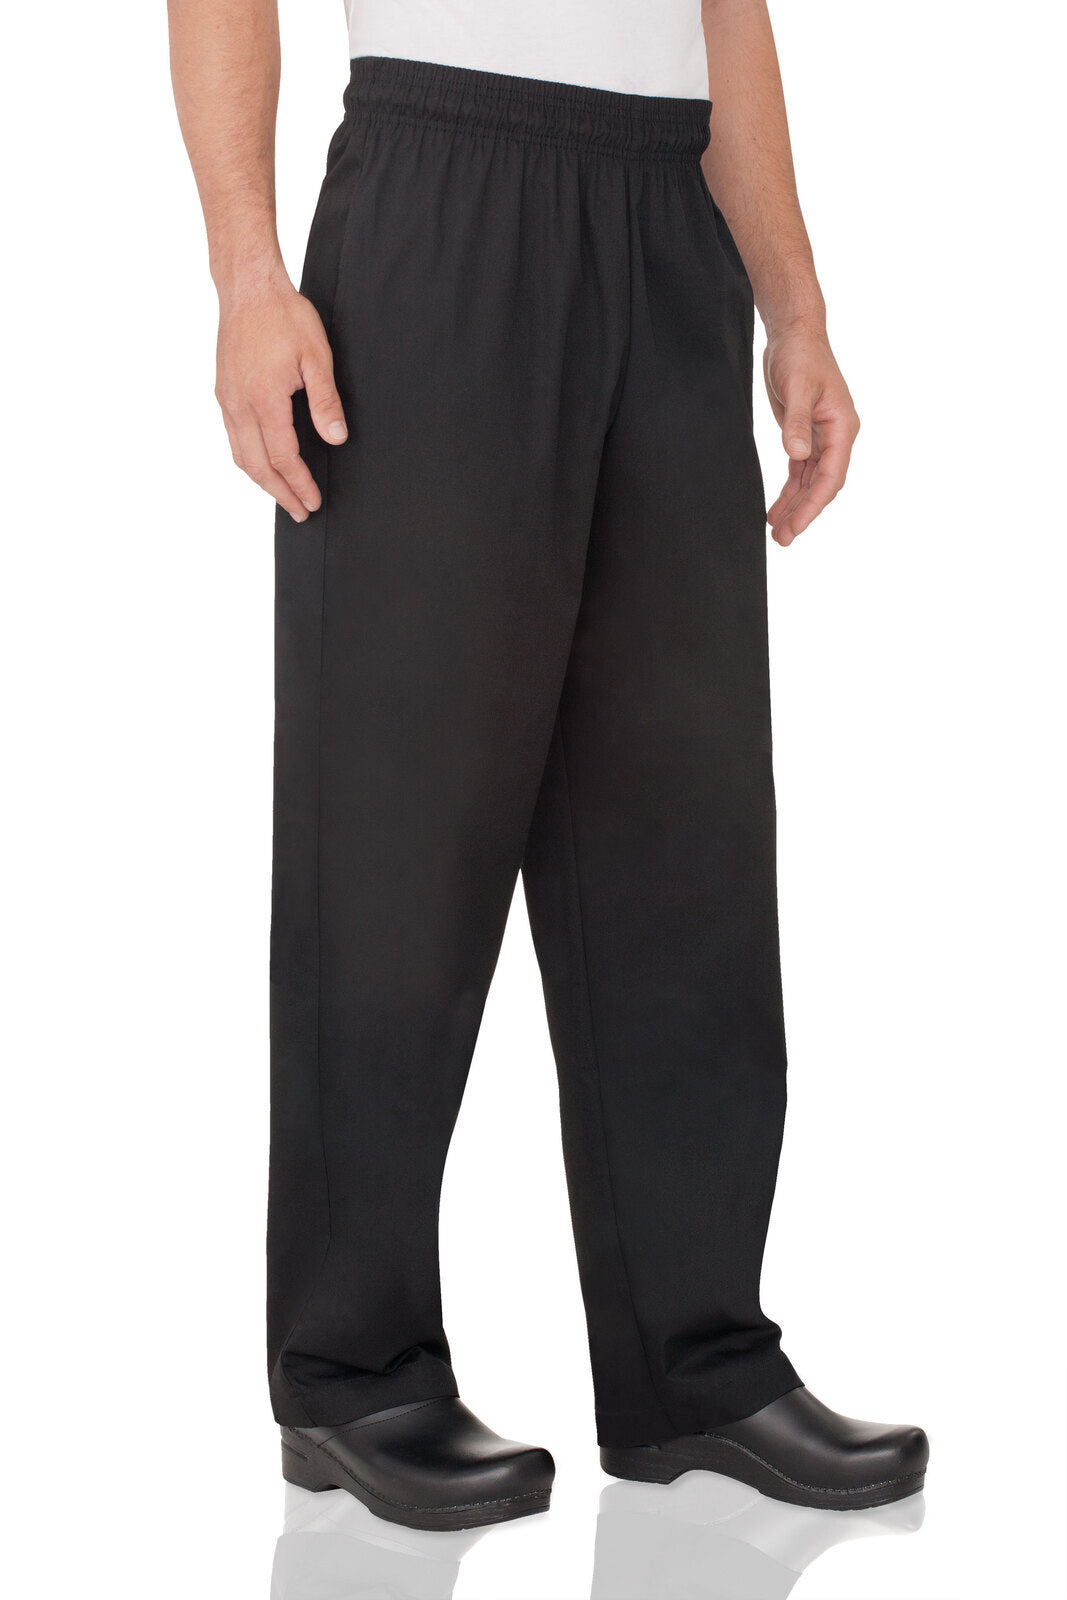 Chef Works Essential Baggy Chef Pants (NBBP)